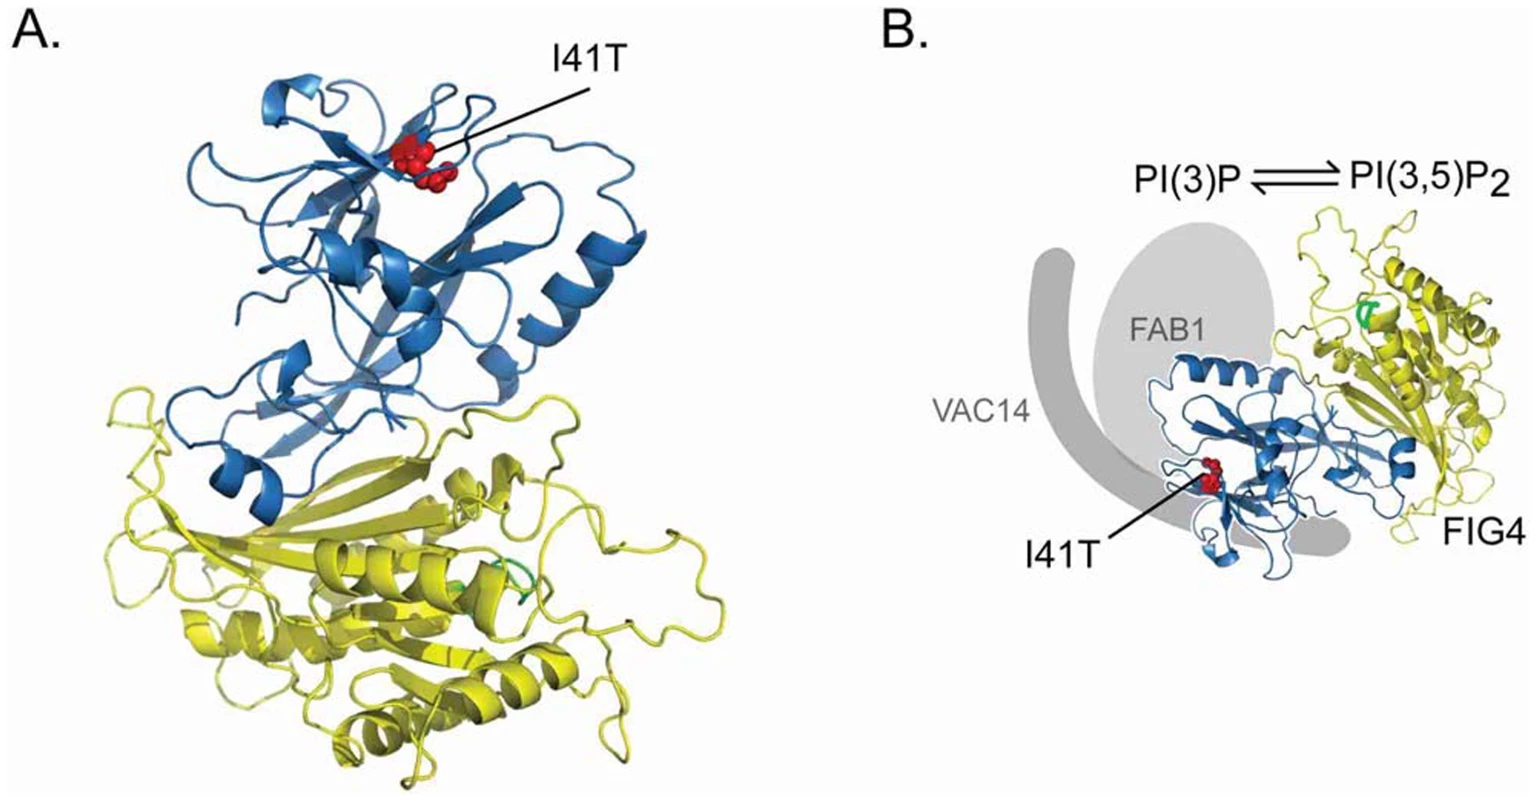 Location of the <i>FIG4</i>-I41T mutation and effect on protein interaction.